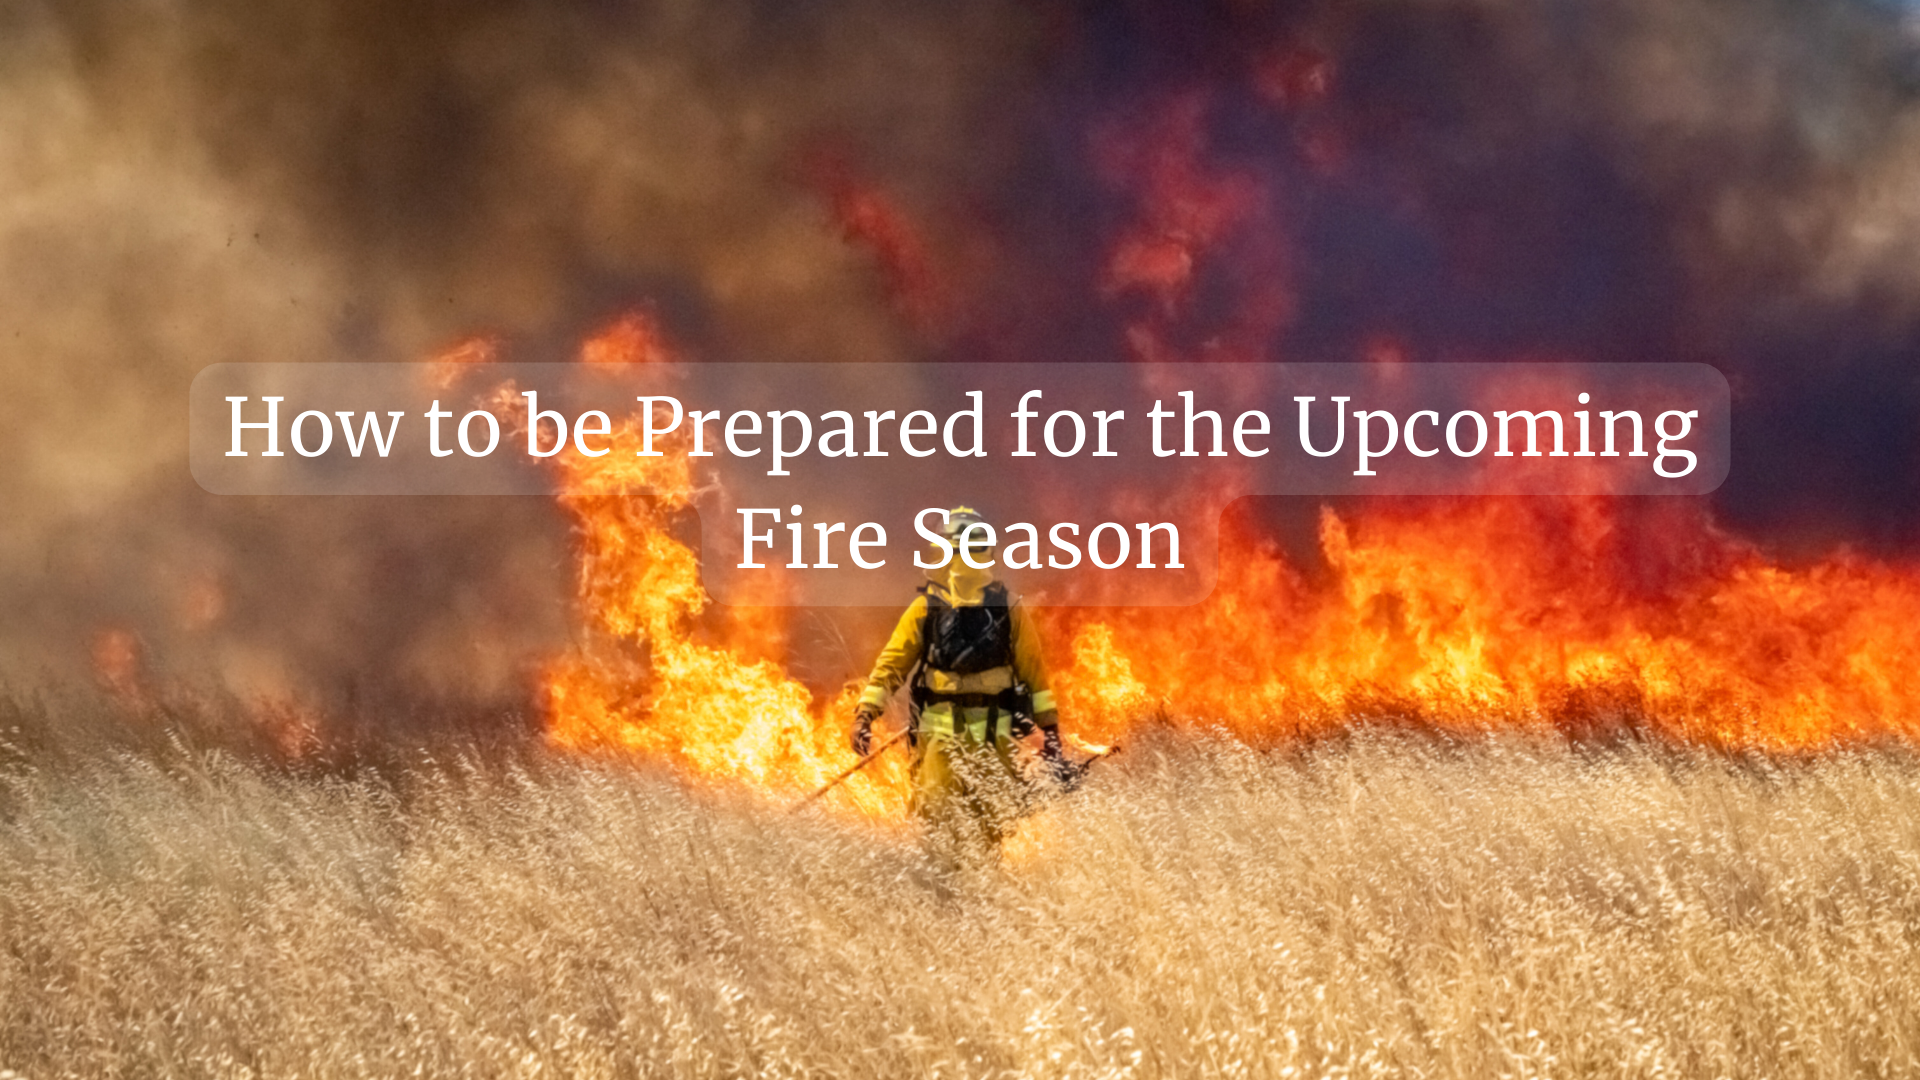 How to be Prepared for the Upcoming Fire Season